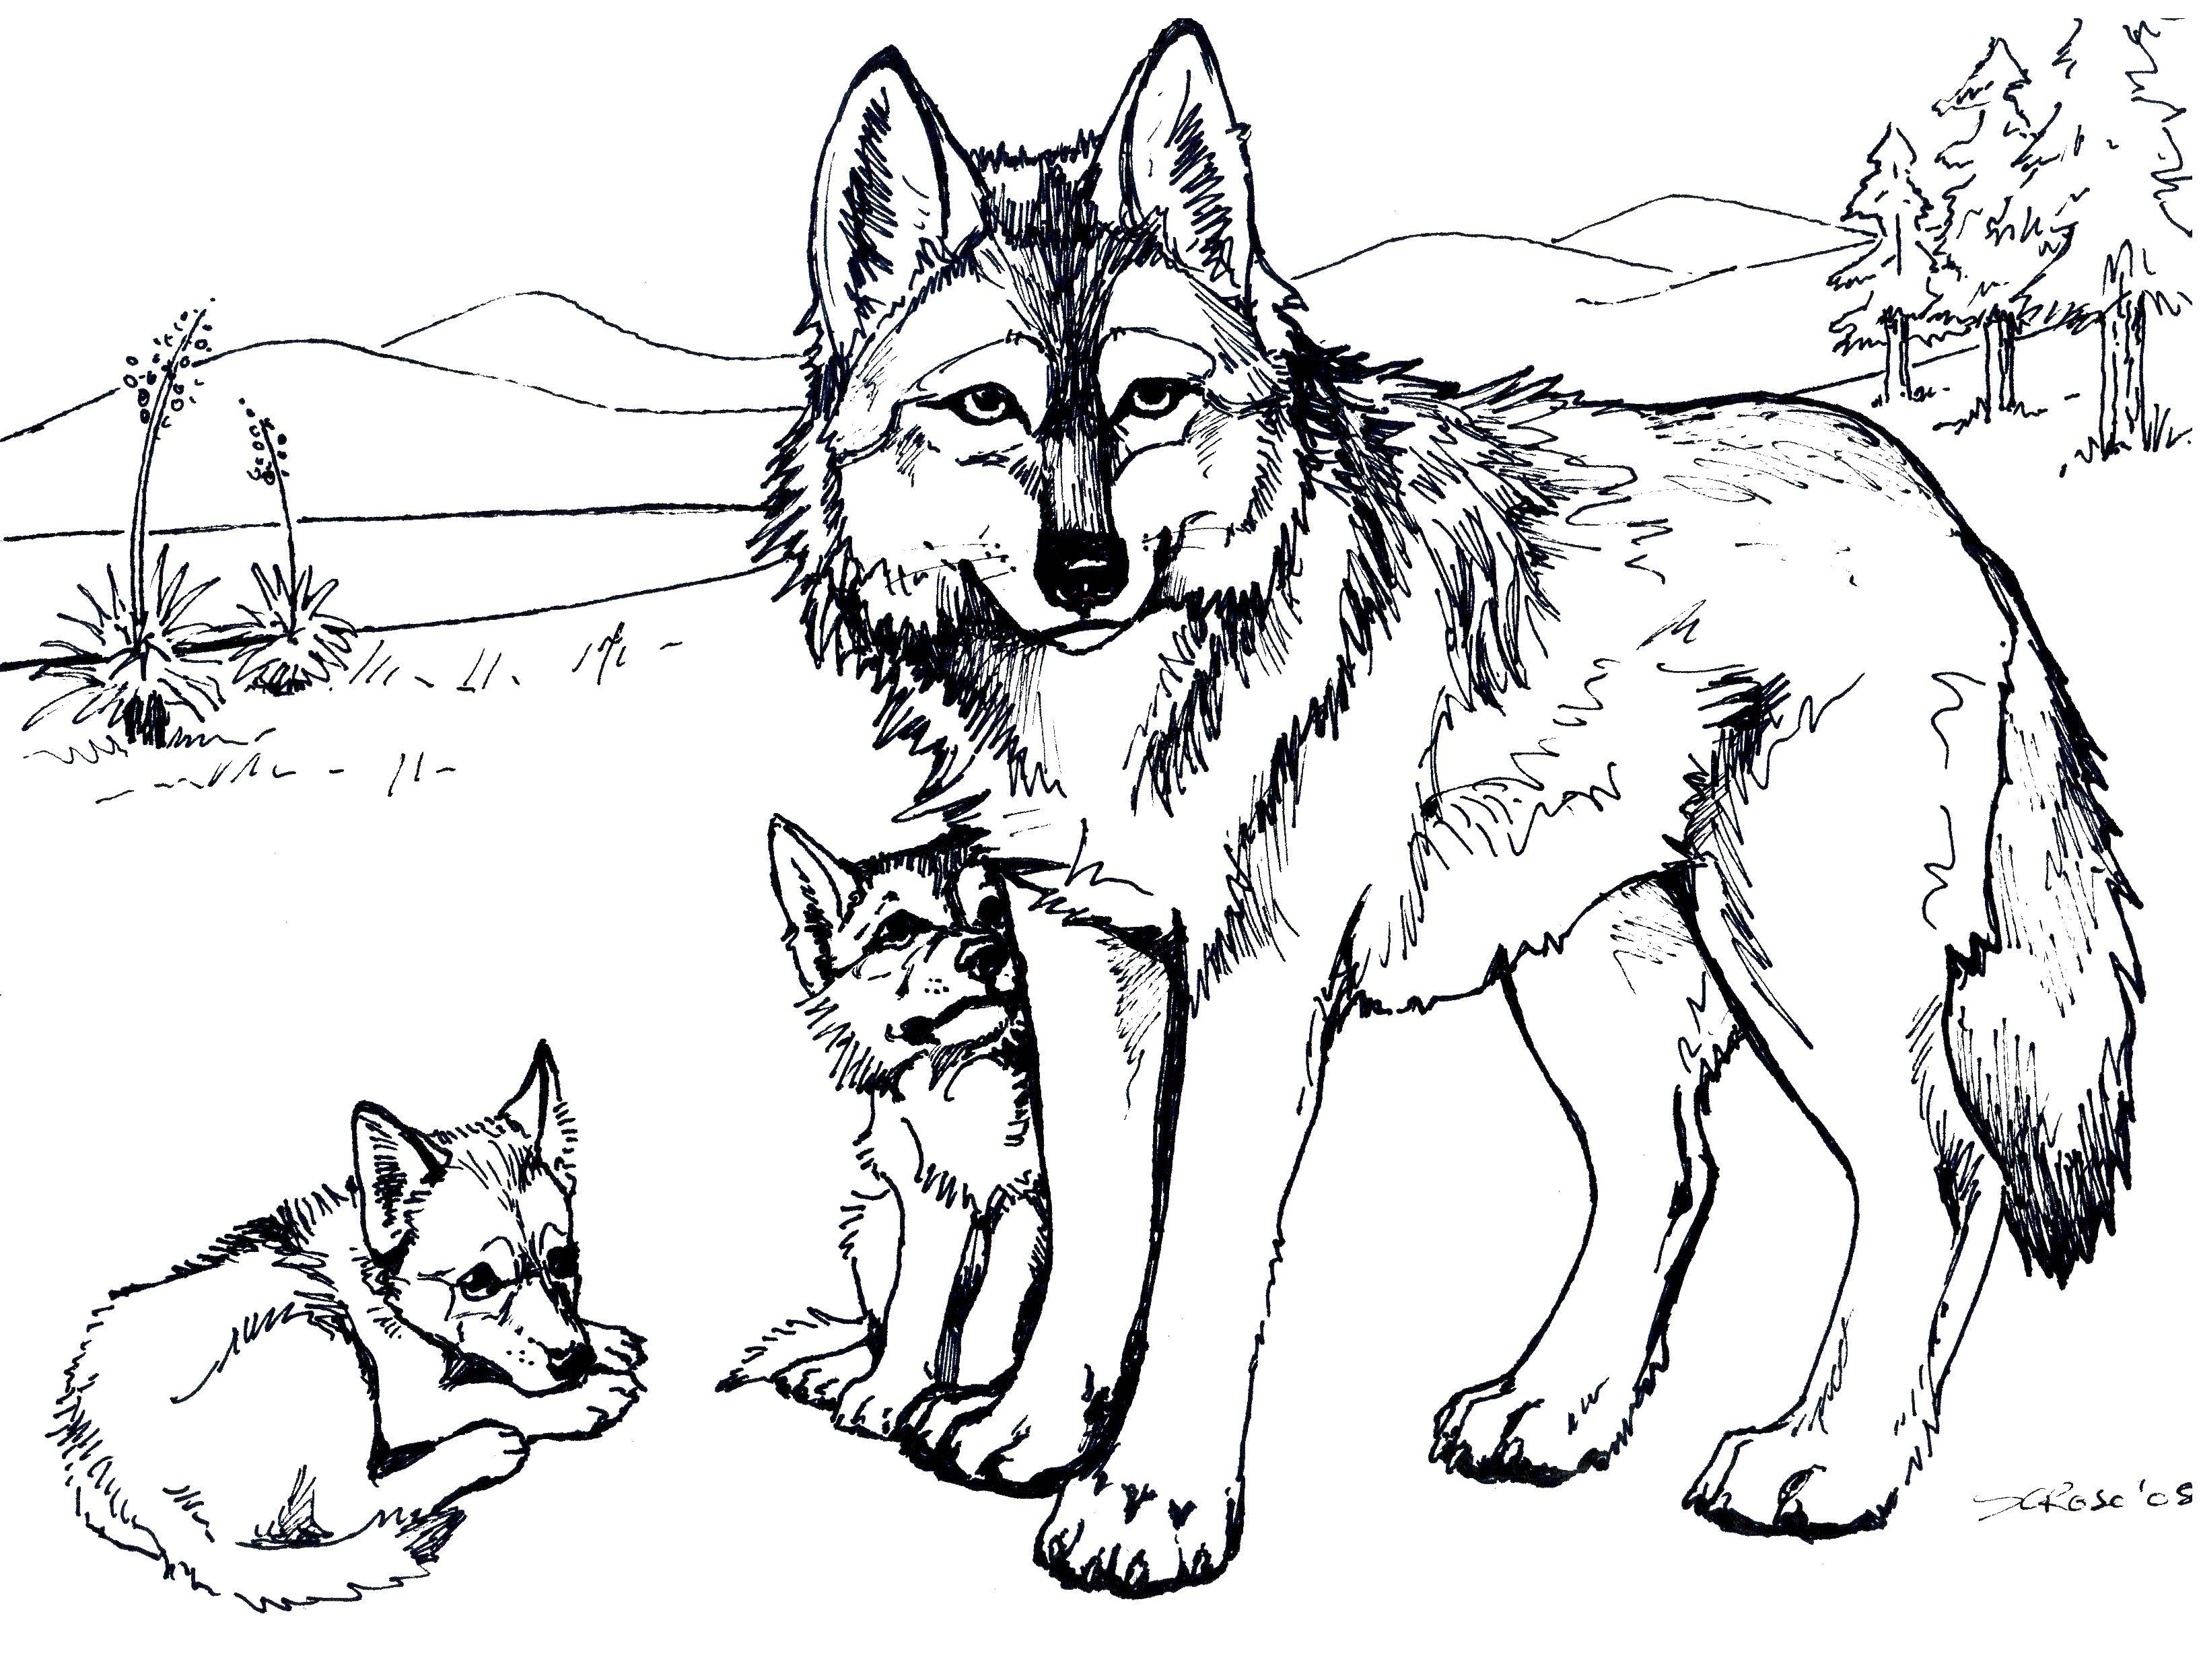 Coloring The wolf and the cubs. Category Animals. Tags:  wolf , wolves, forest.